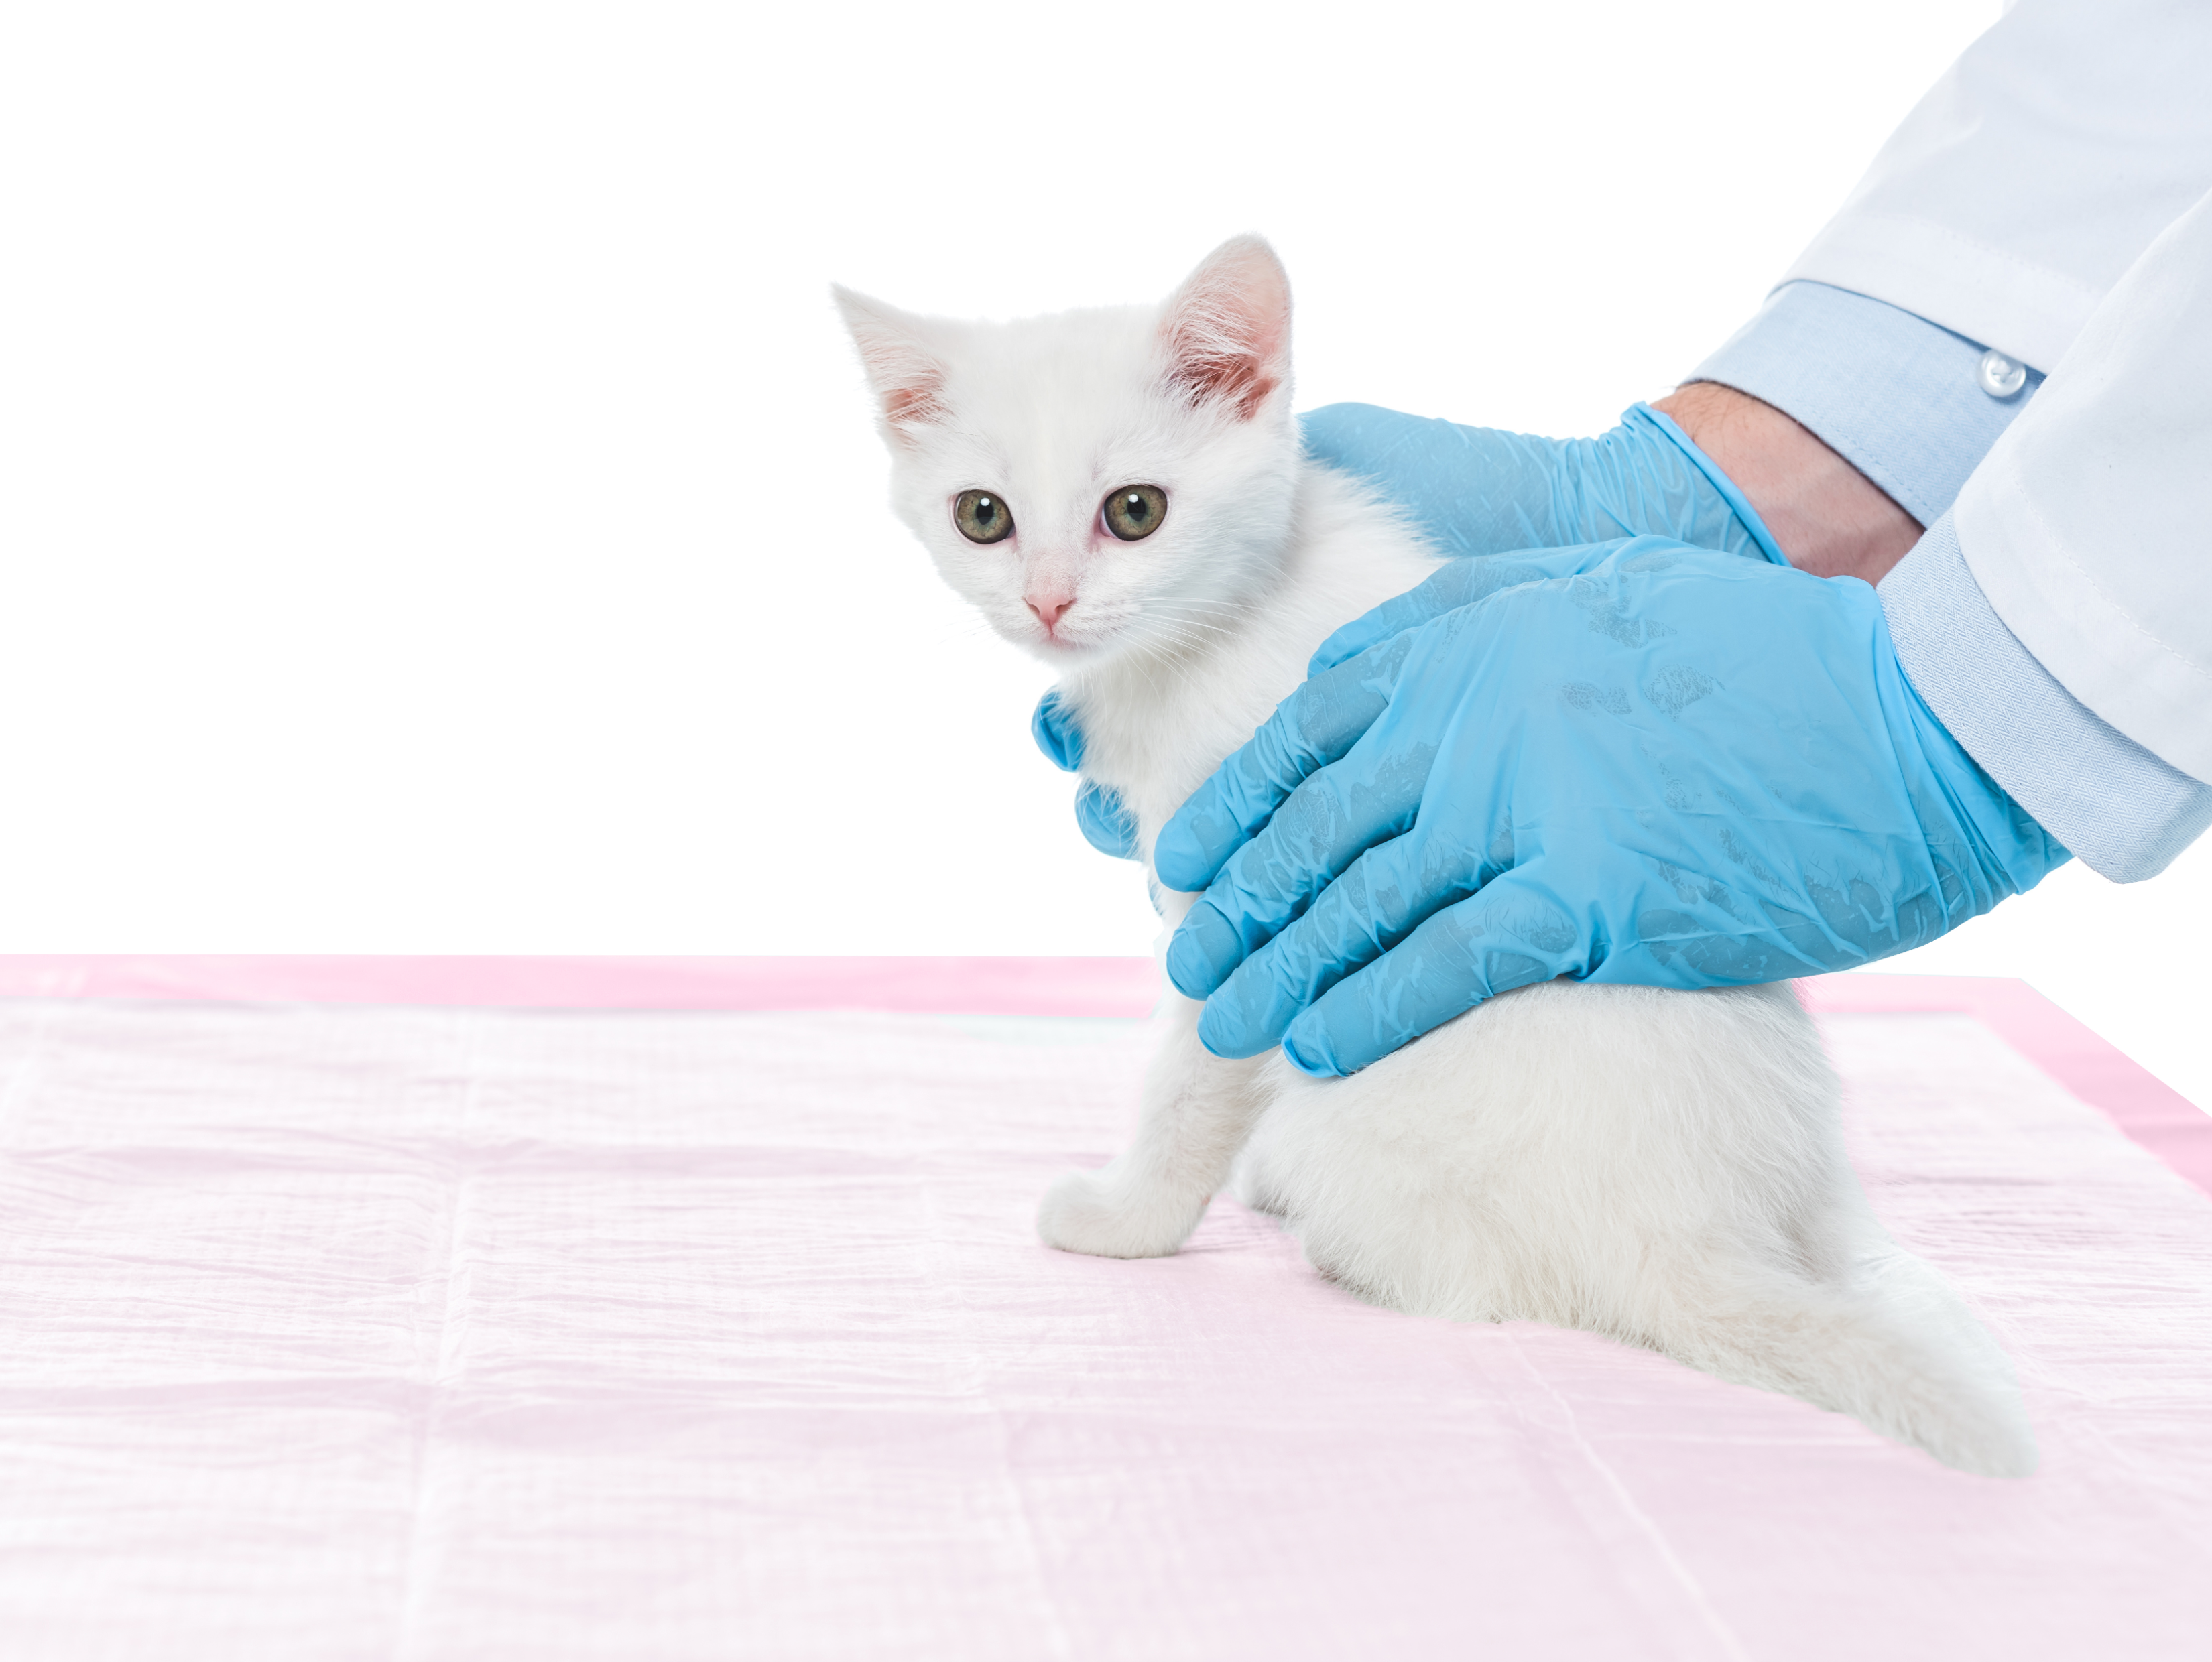 a white kitten placed on a pink pee mat by a man with gloves on